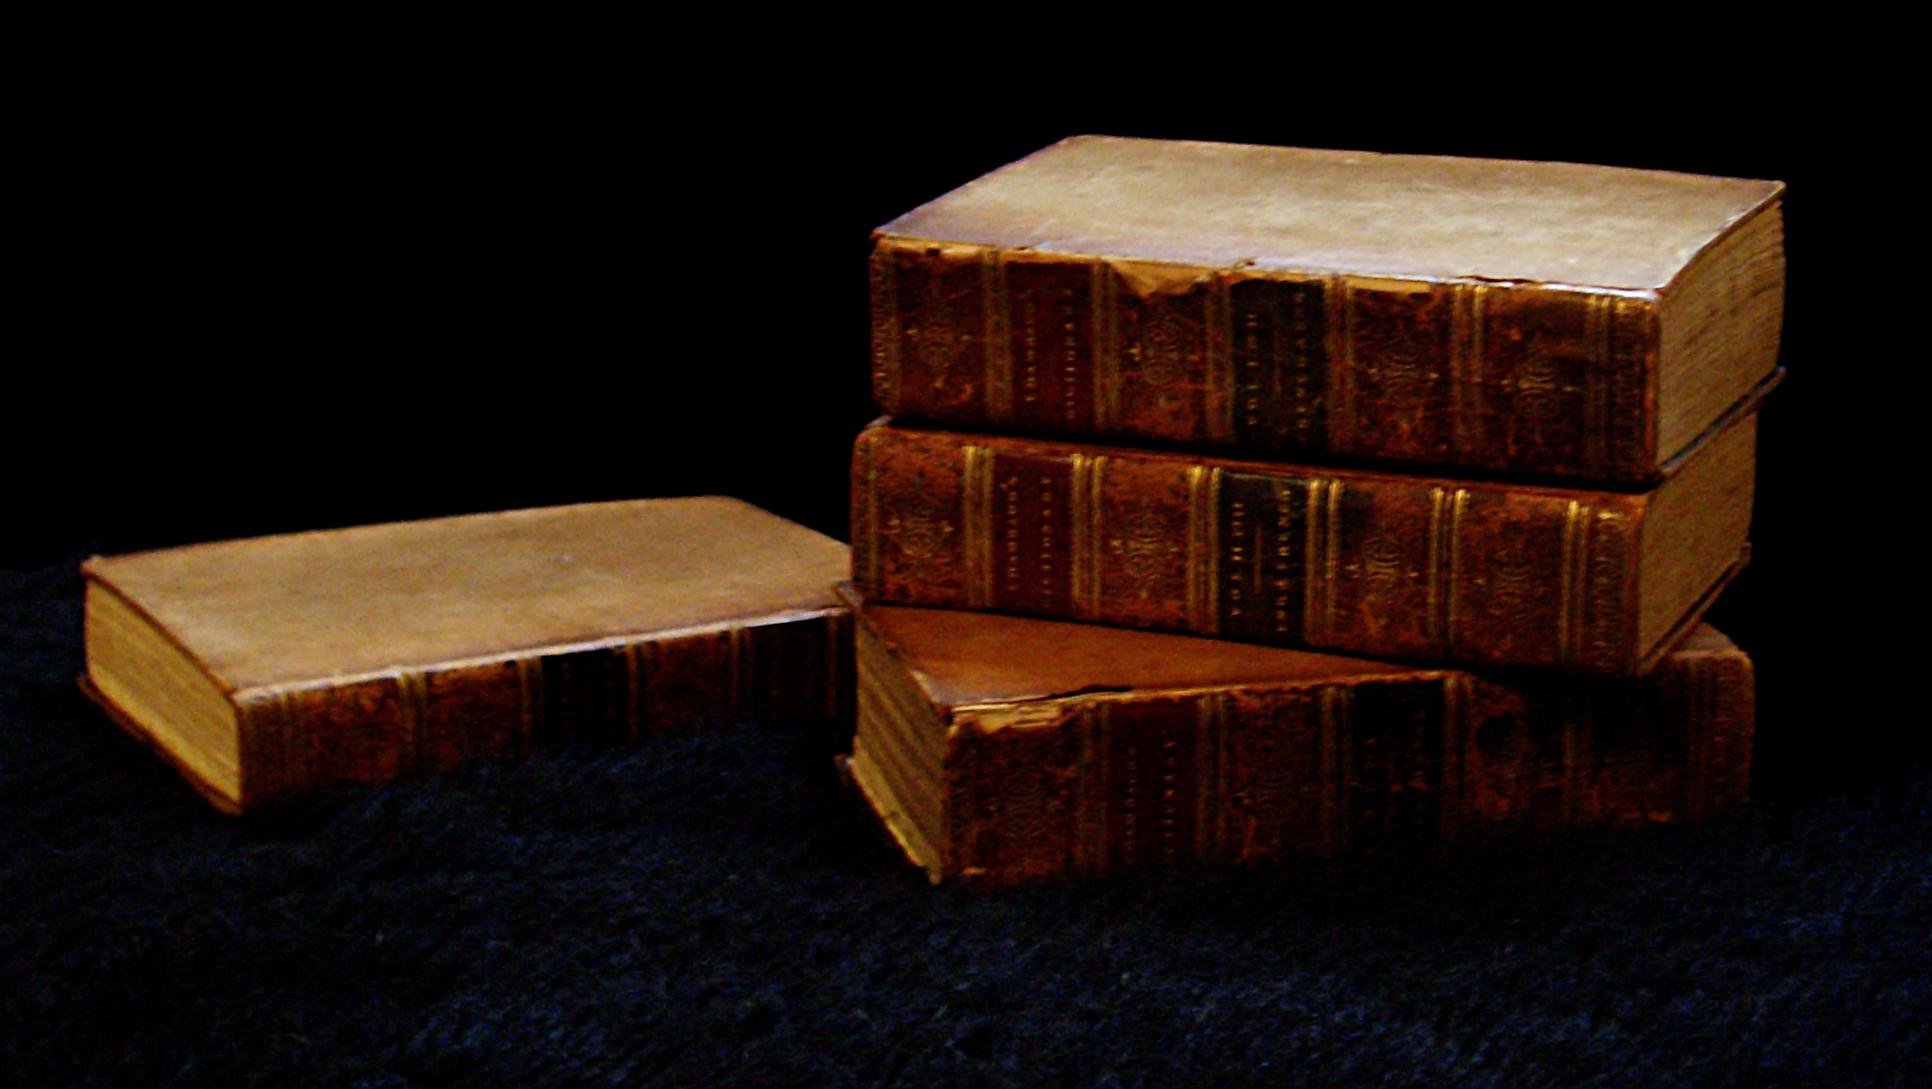 Image of old catalogue books